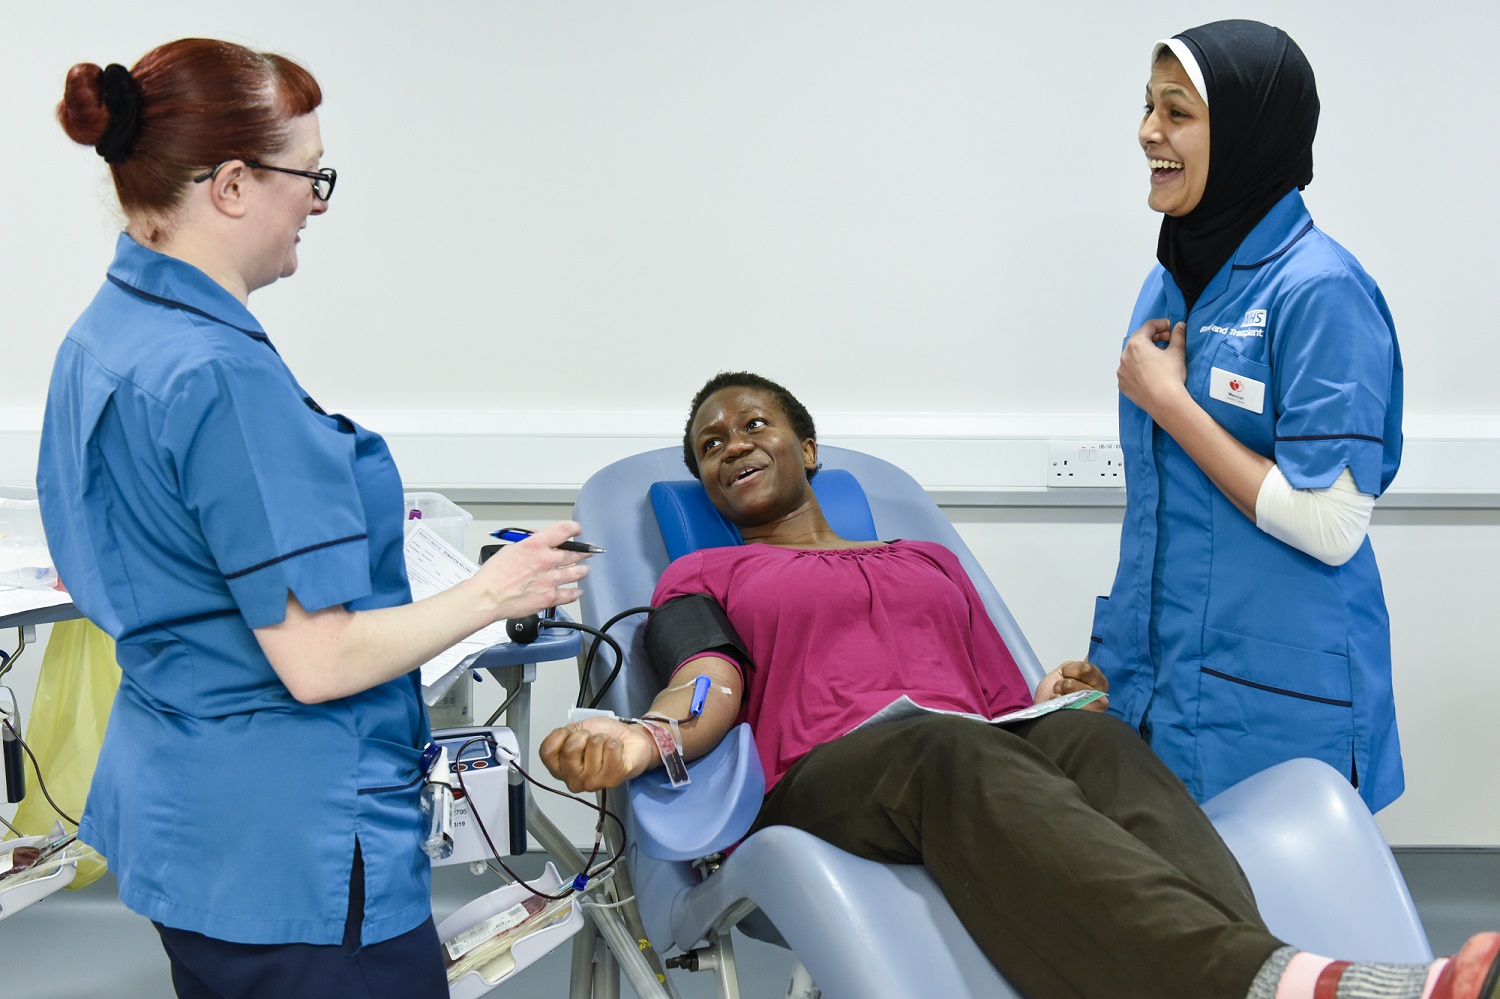 A blood donor donating blood, looked after by two Blood Donation Healthcare Assistants